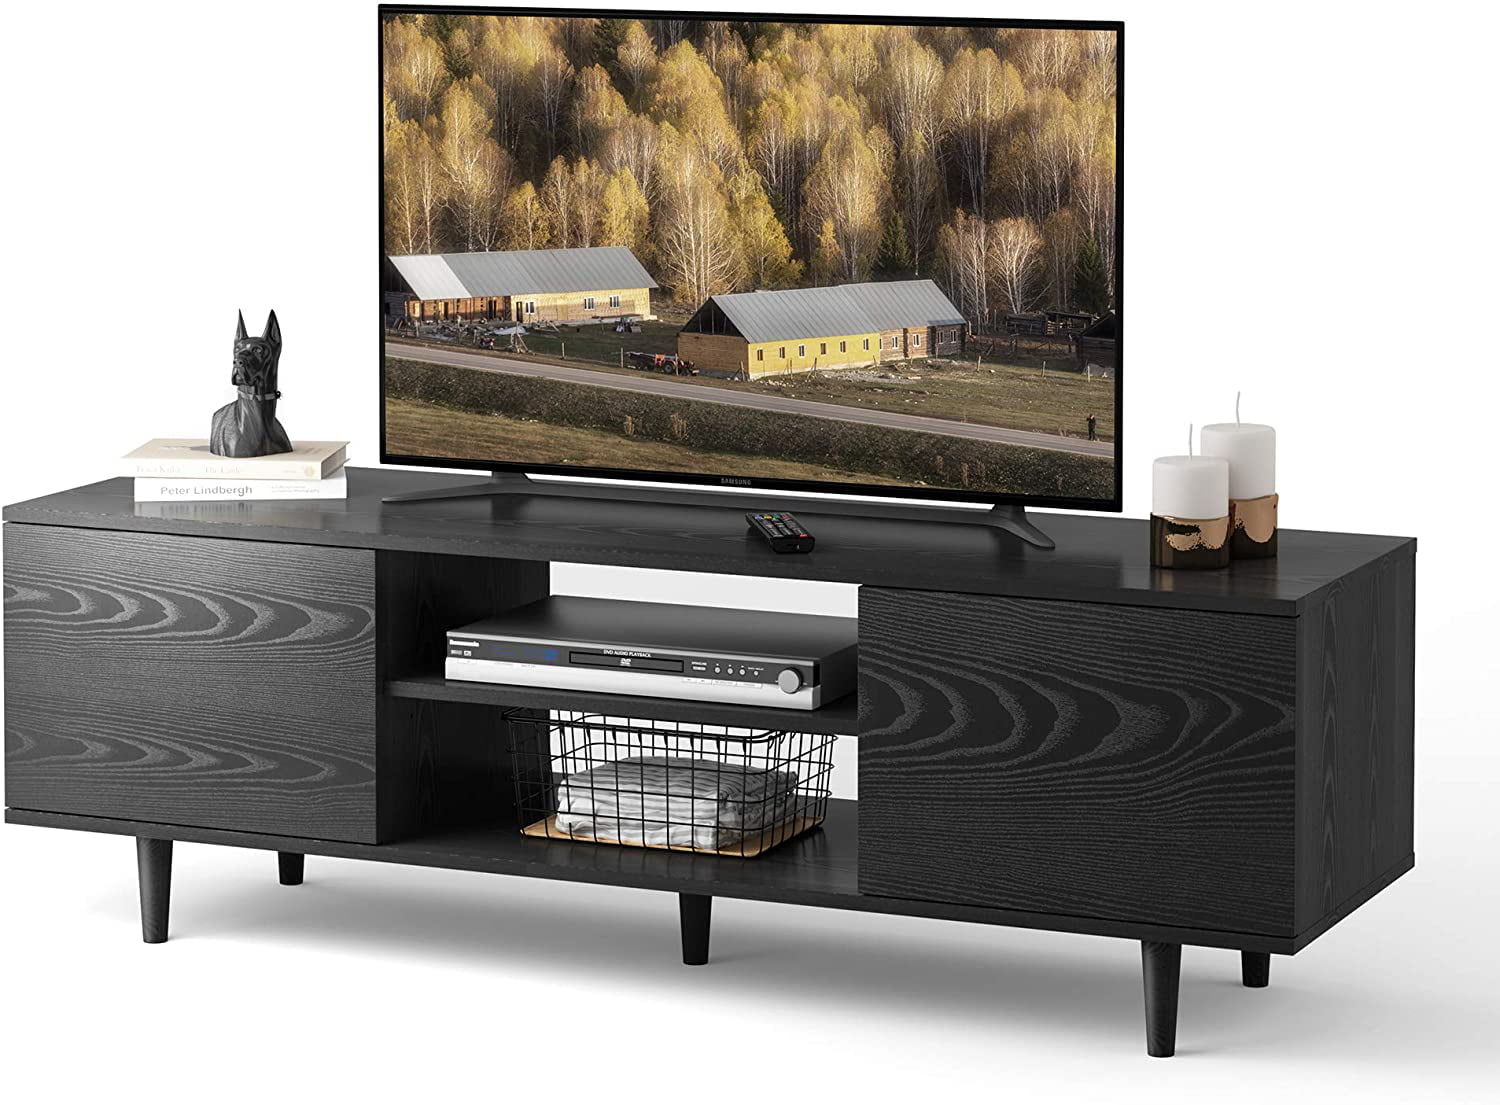 Bedroom Gray Oak Entertainment Center for Living Room 50 inch TV Console with Storage Cabinet WLIVE TV Stand for 55 inch Flat Screen